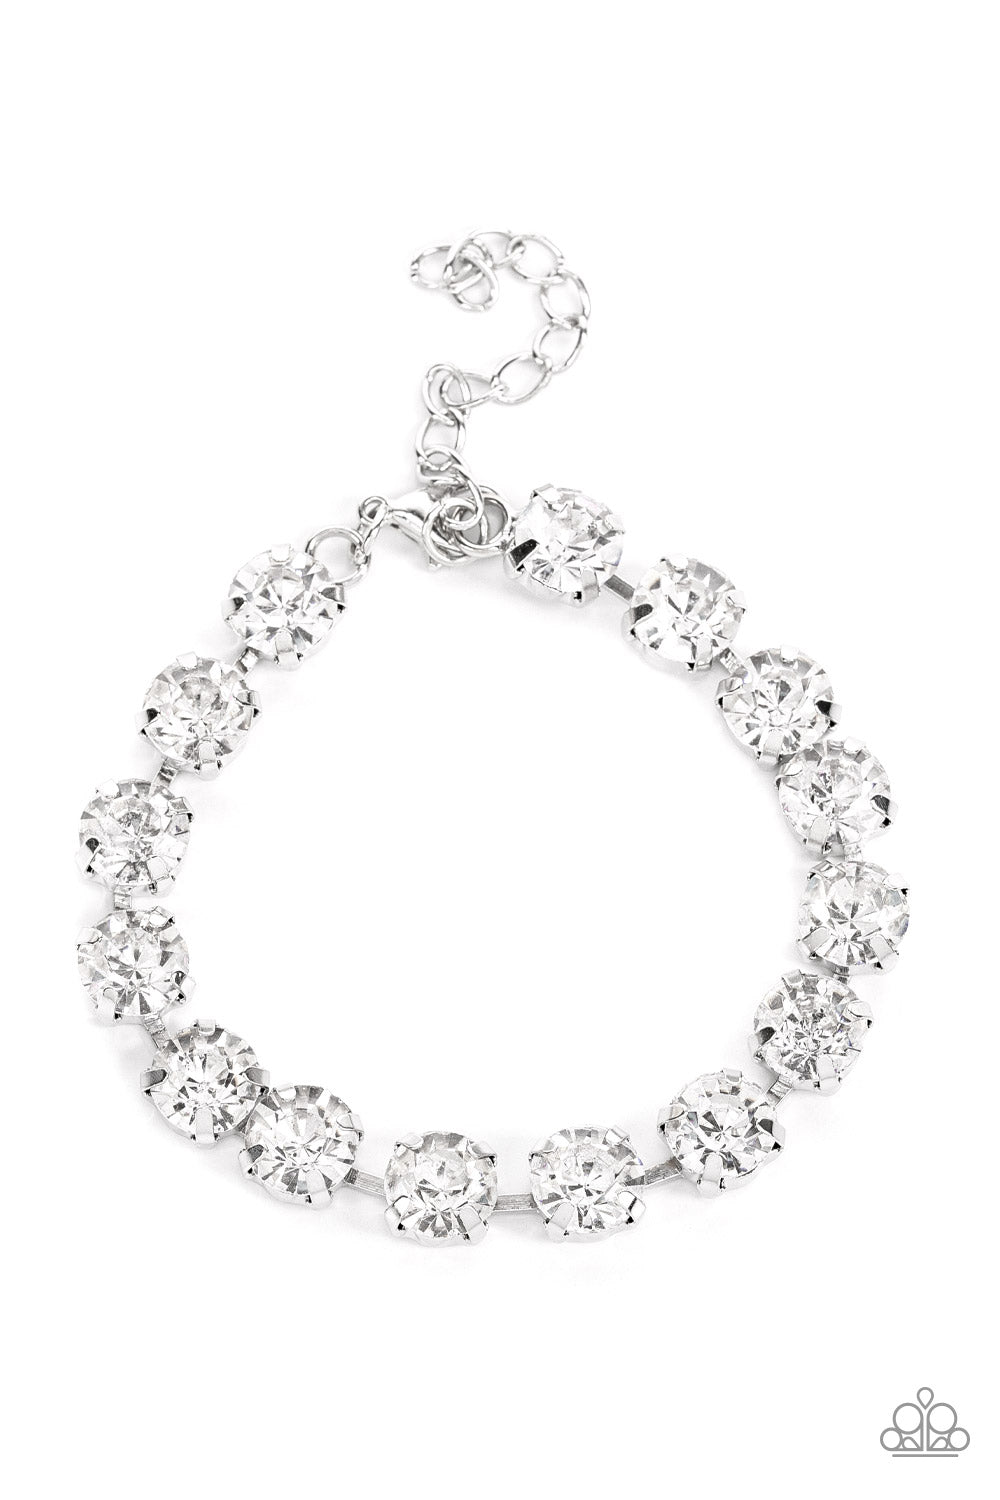 Paparazzi Accessories - A-Lister Afterglow - White Bracelet Bling By Titia Boutique